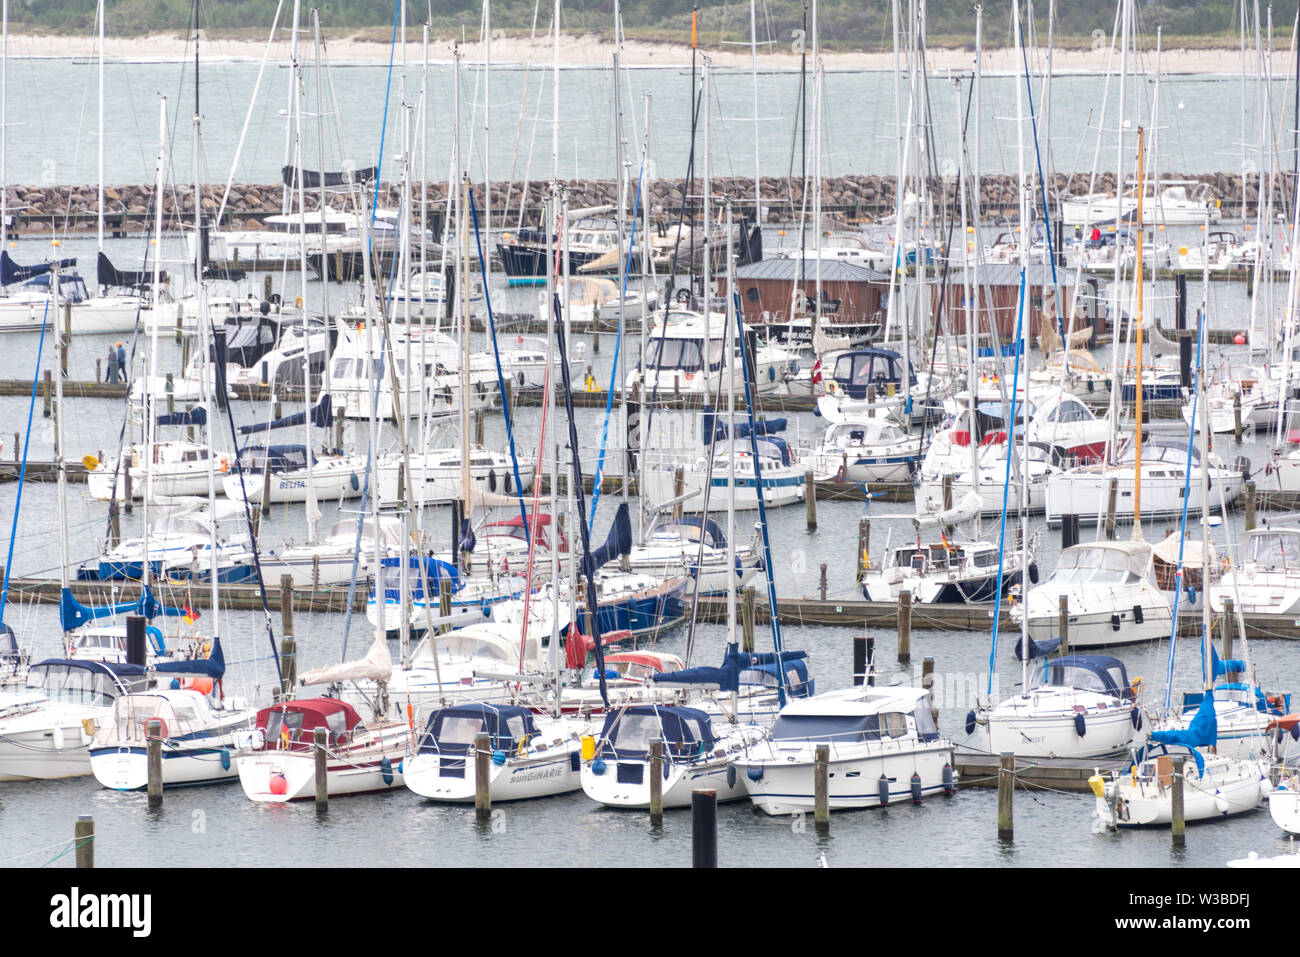 Rostock, Germany - July 7, 2019: View of yachts and sailing ships in the port of Rostock, Germany. Stock Photo